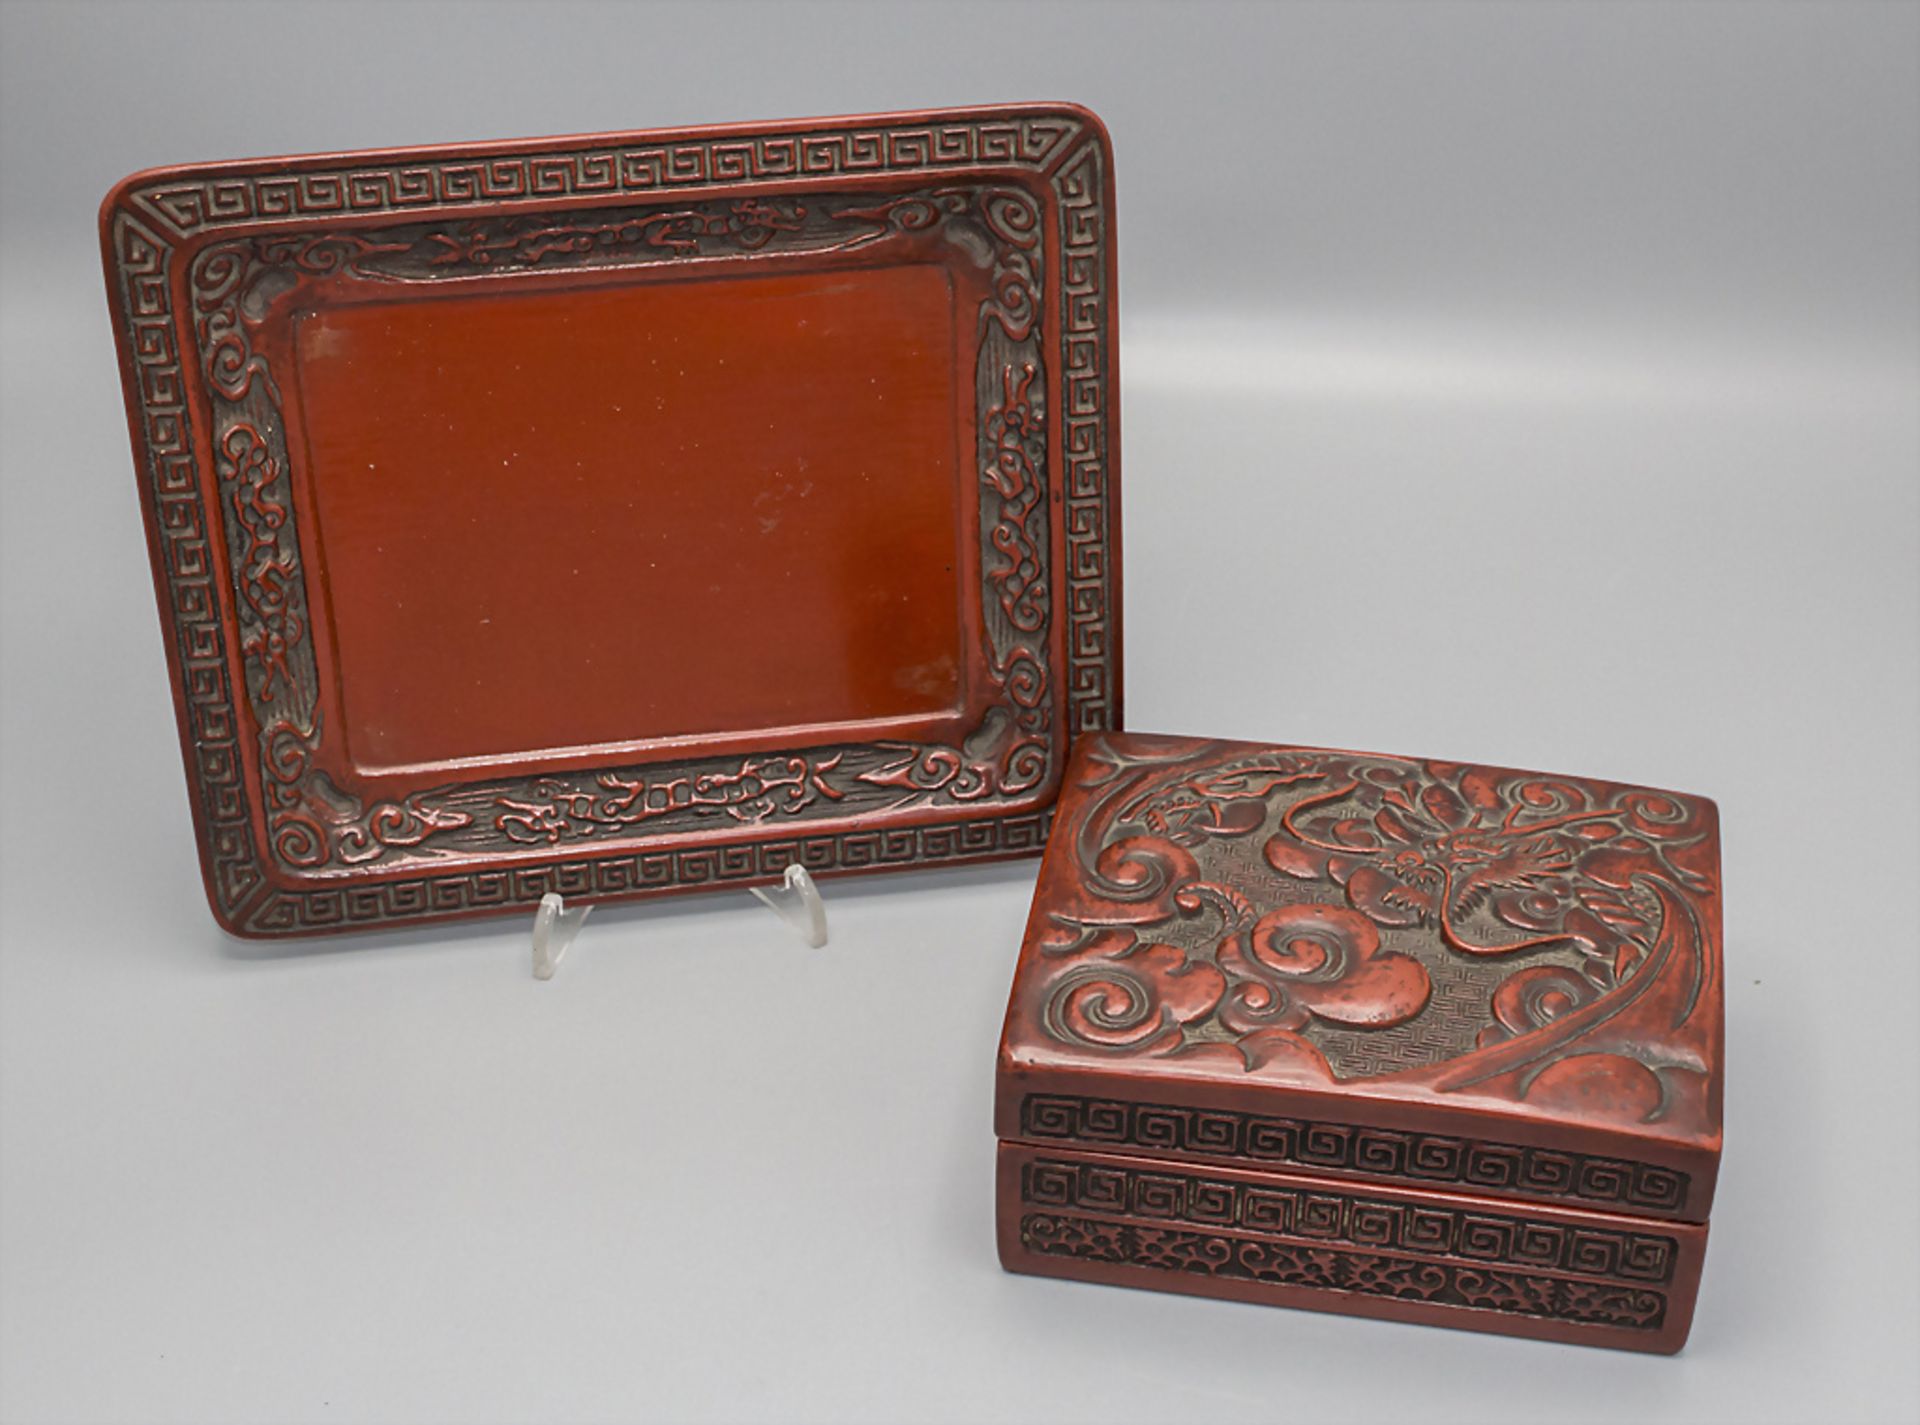 Lackdose mit Tablett / A lacquer box with tray, China, 19. Jh. - Image 3 of 7